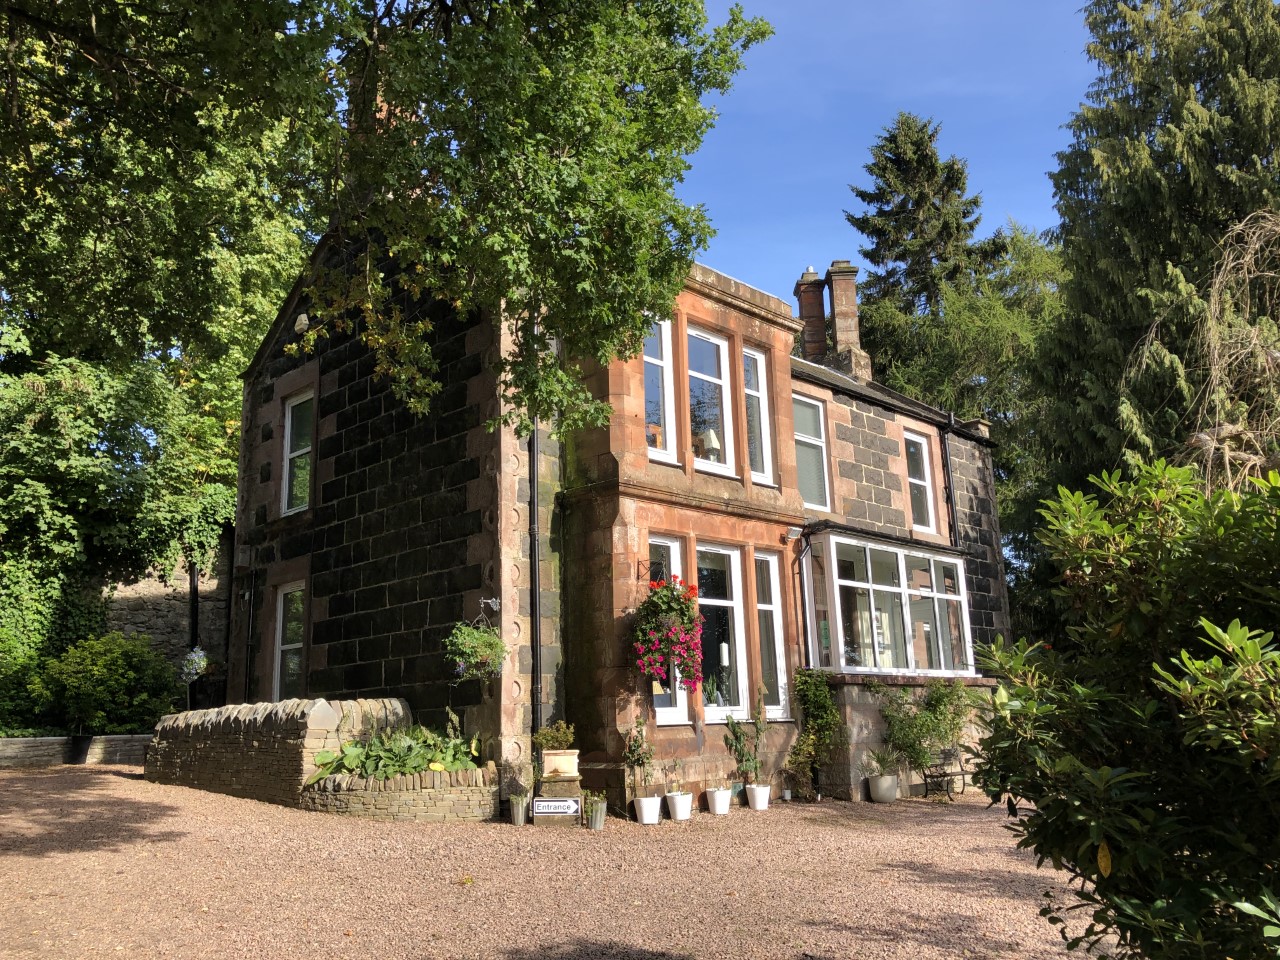 Ivybank Lodge, Blairgowrie, ranks 3rd in Europe and 11th globally, as one of the best locations for TripAdvisor's Best Small Stays in the UK.